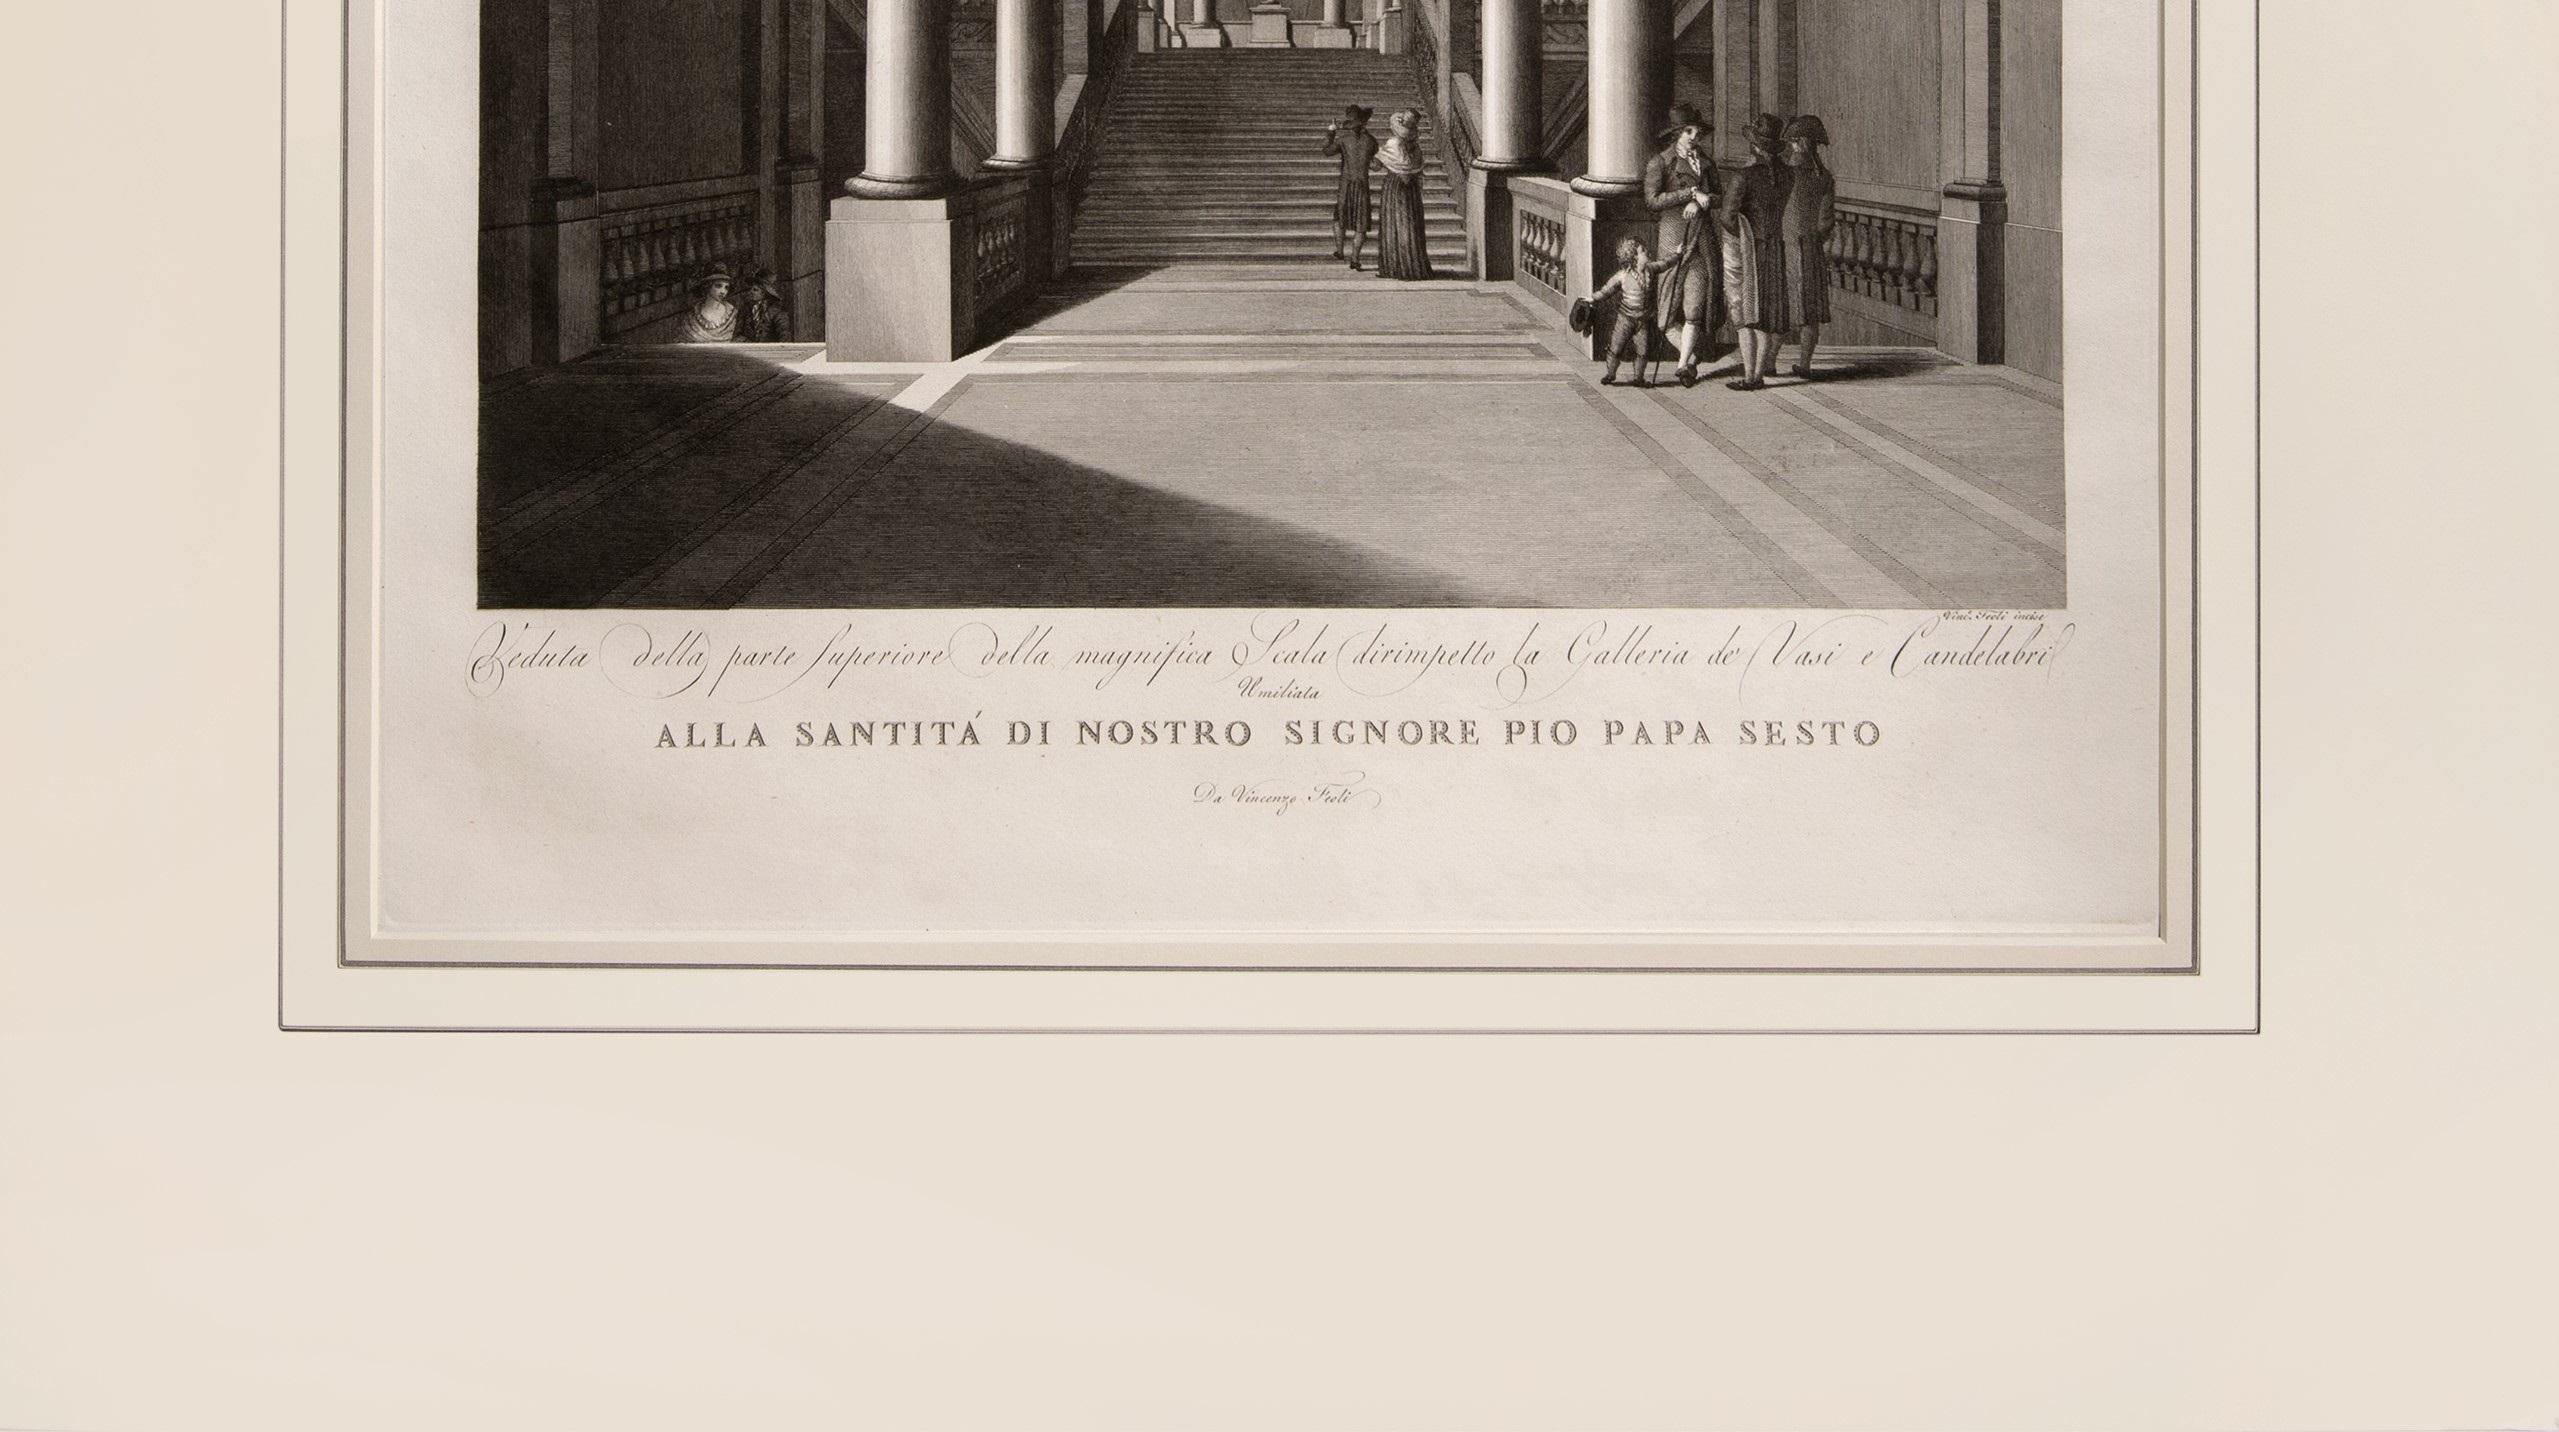 Magnificent large plate illustrating the Vatican Museum - Print by FEOLI, Vincenzo.